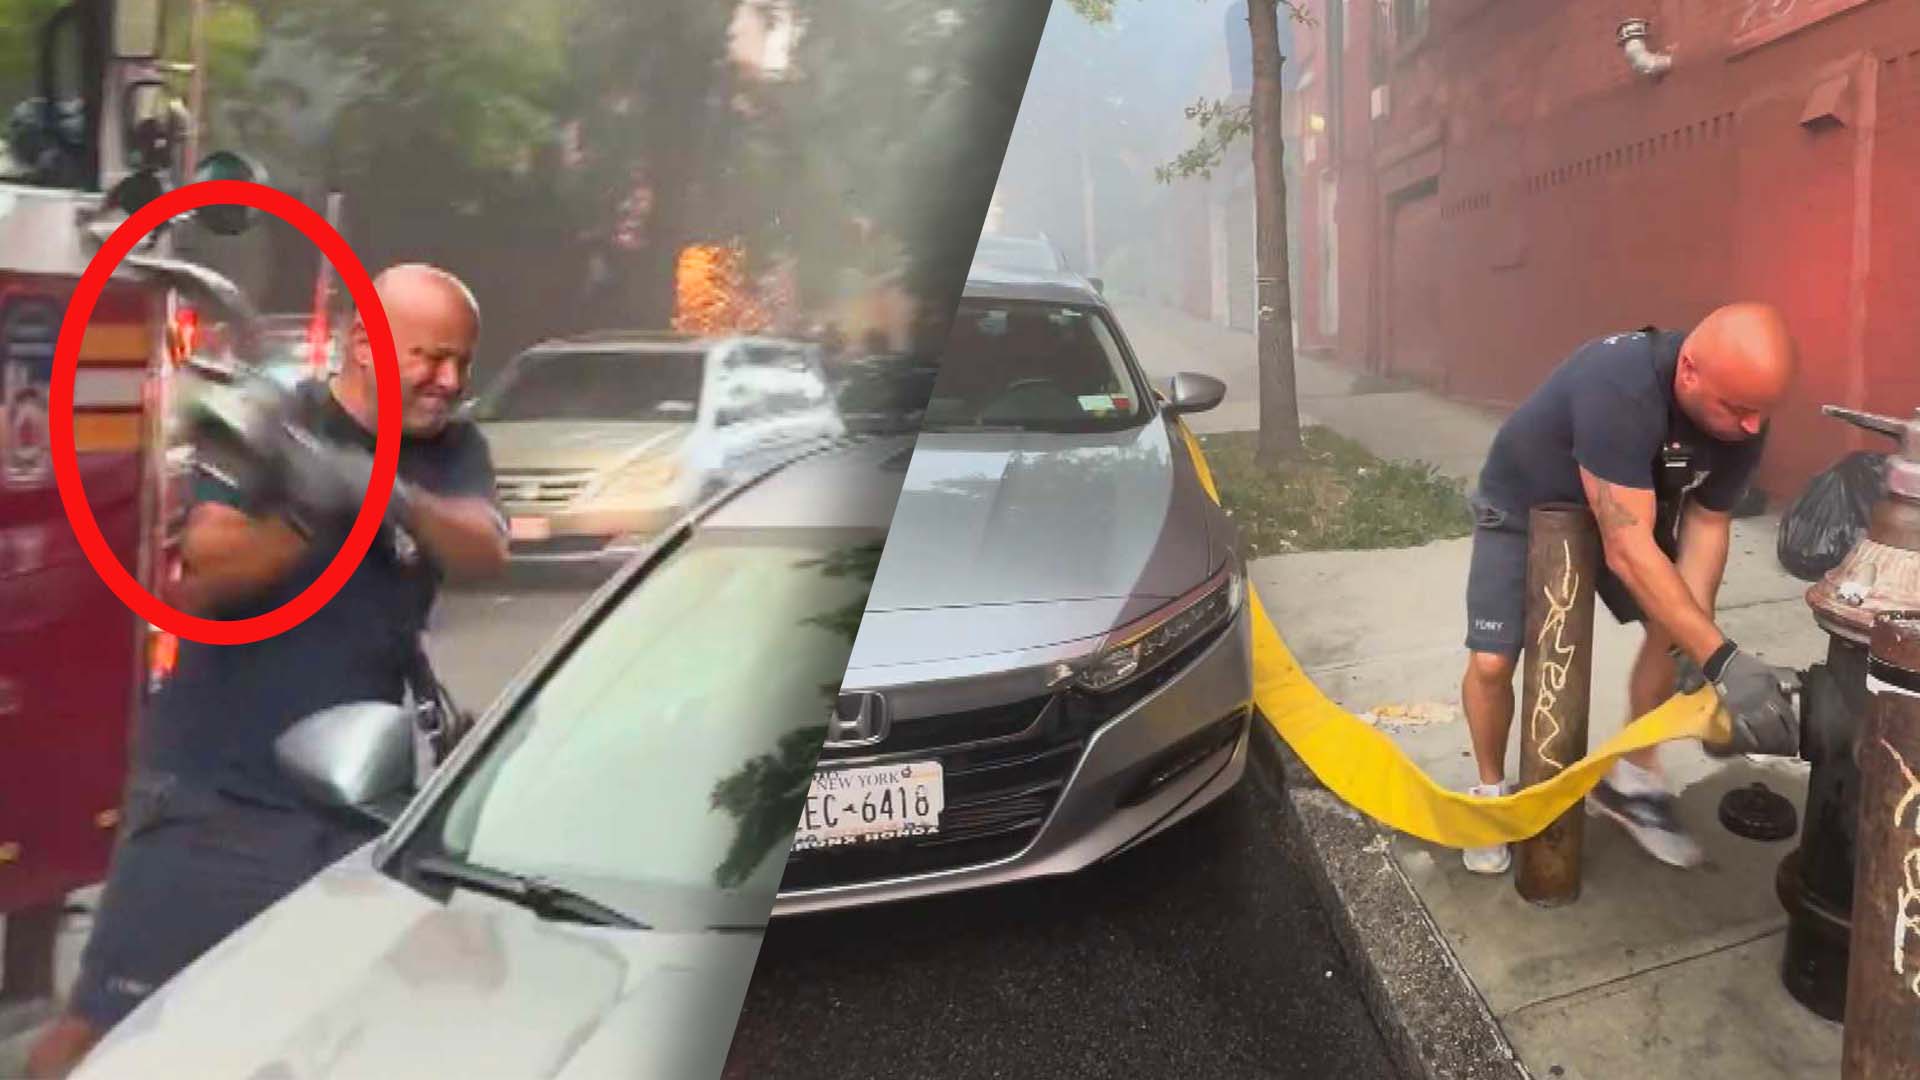 NY Firefighter smashing car window with a wrench / NY Firefighter pulling hose through broken car windows to attach to hydrant